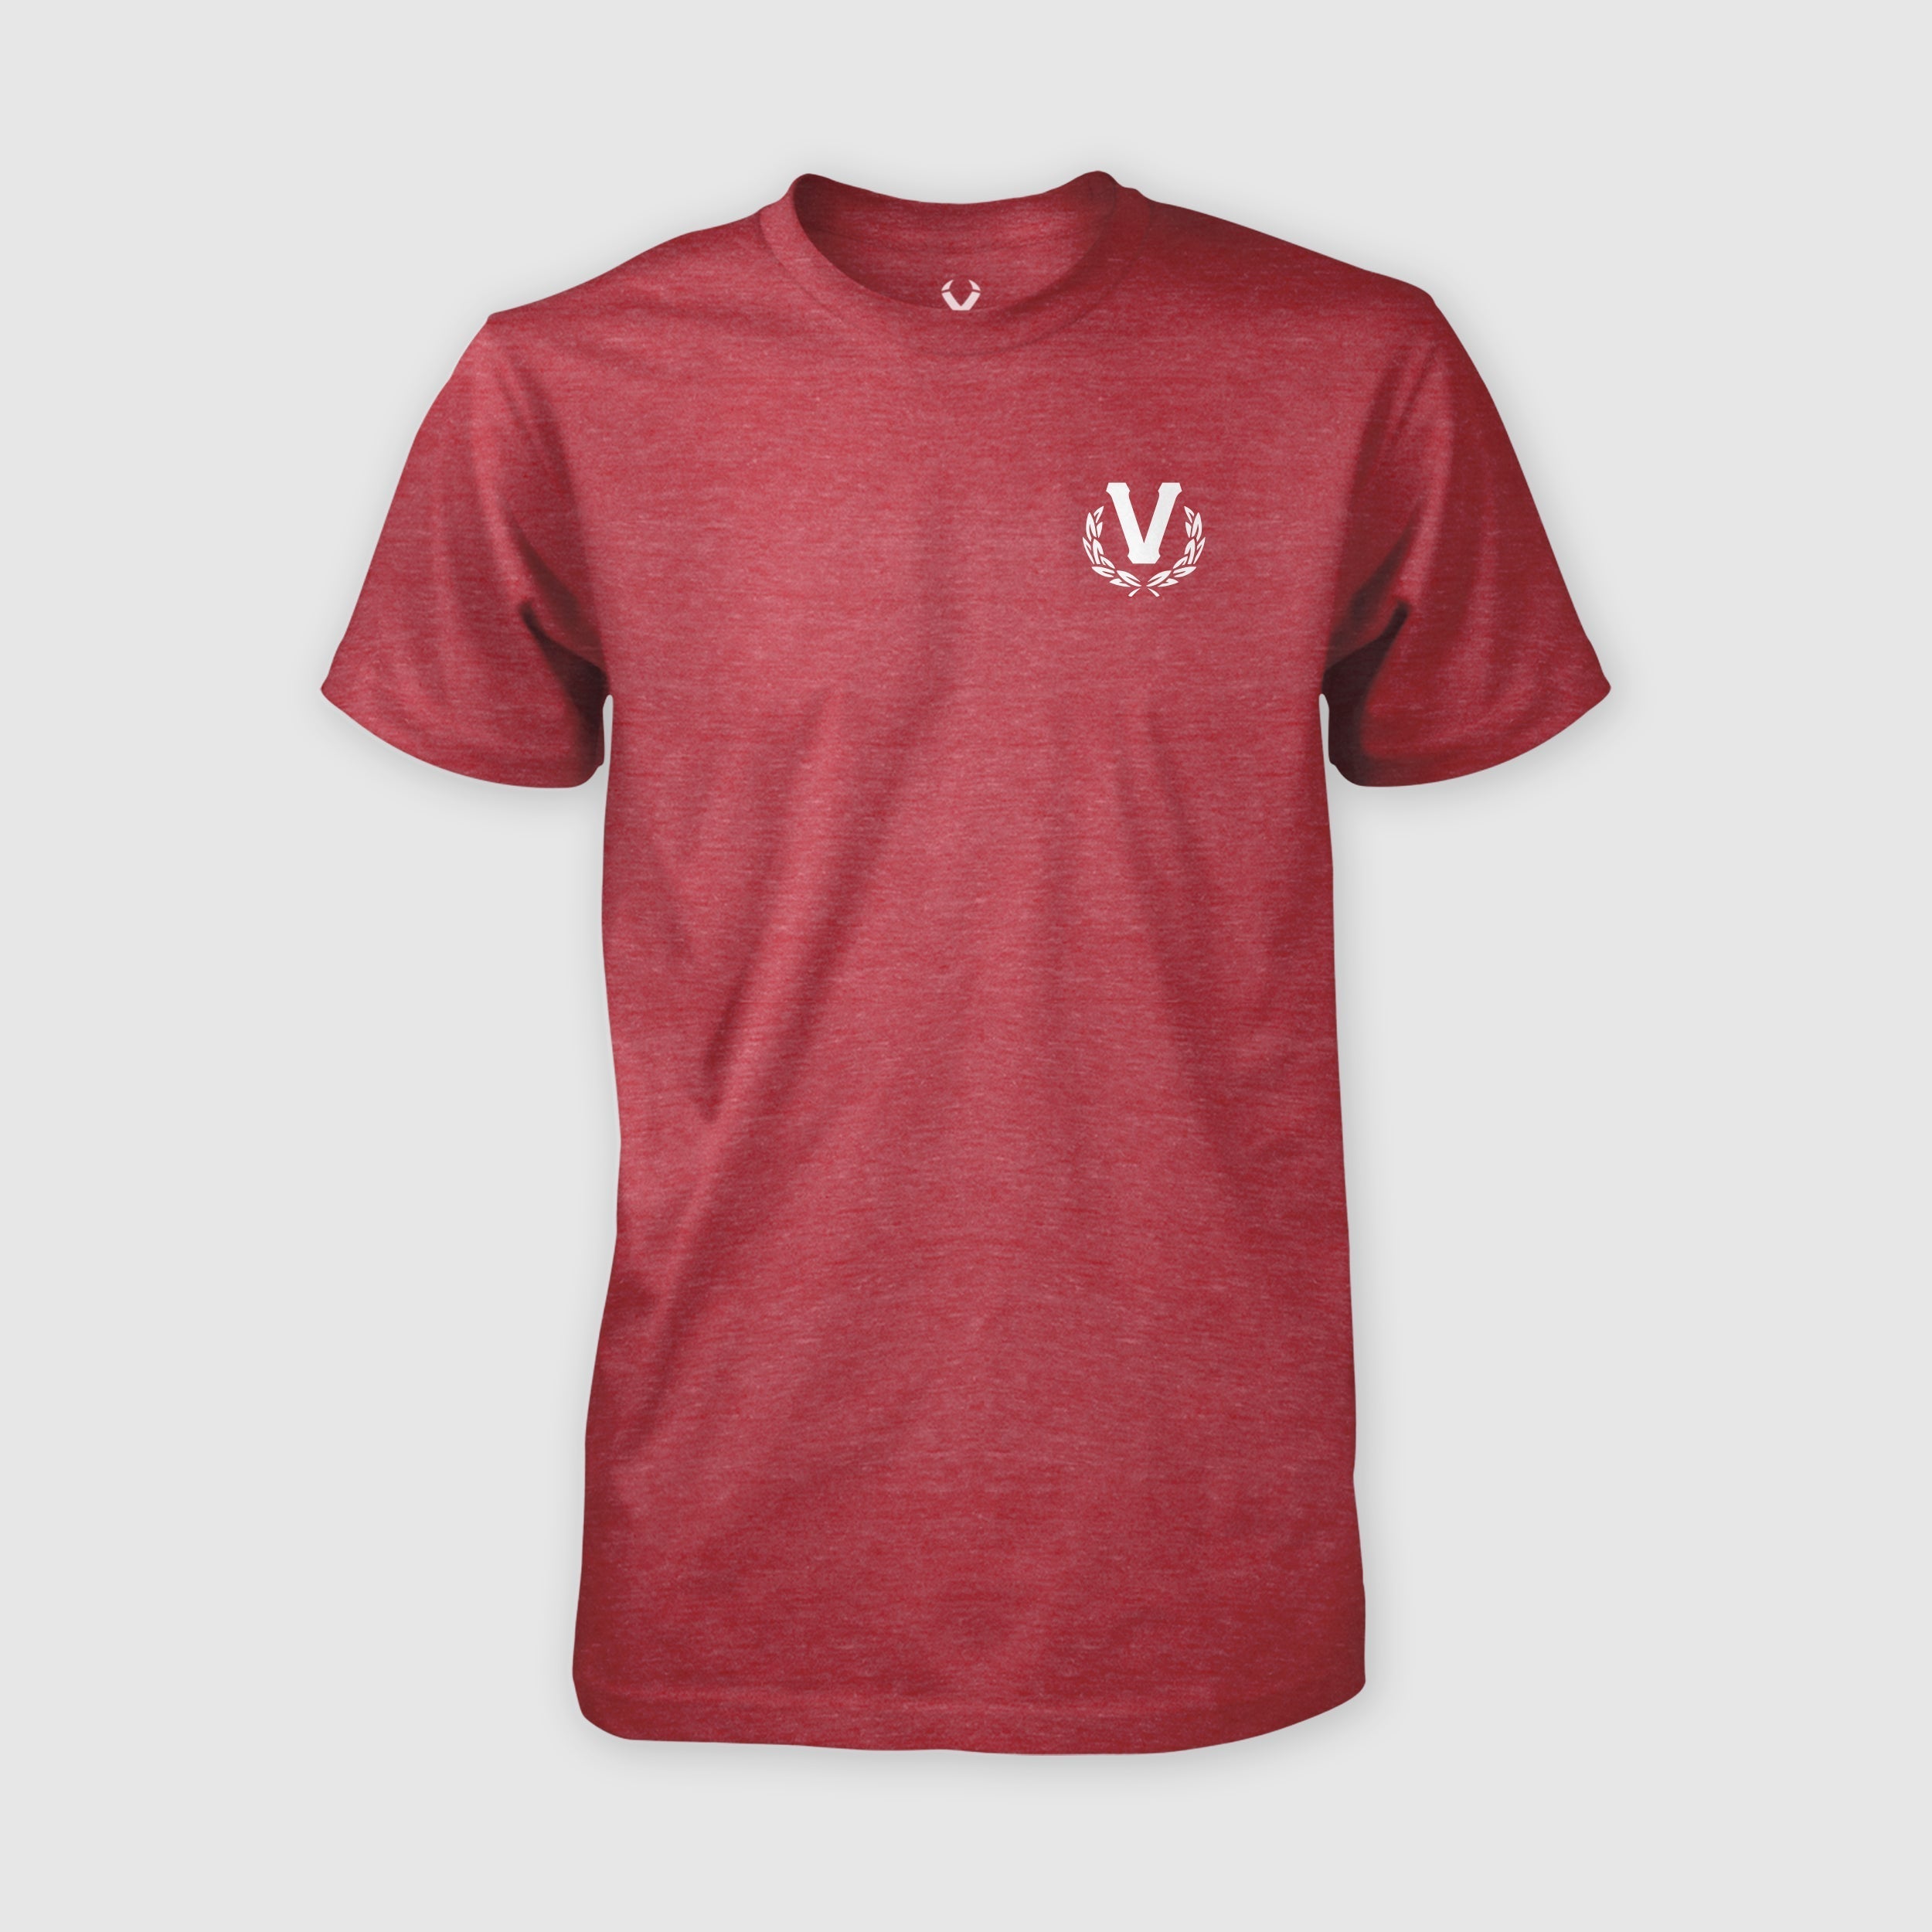 Vantage Youth Blood & Sweat Tee - Heather Red